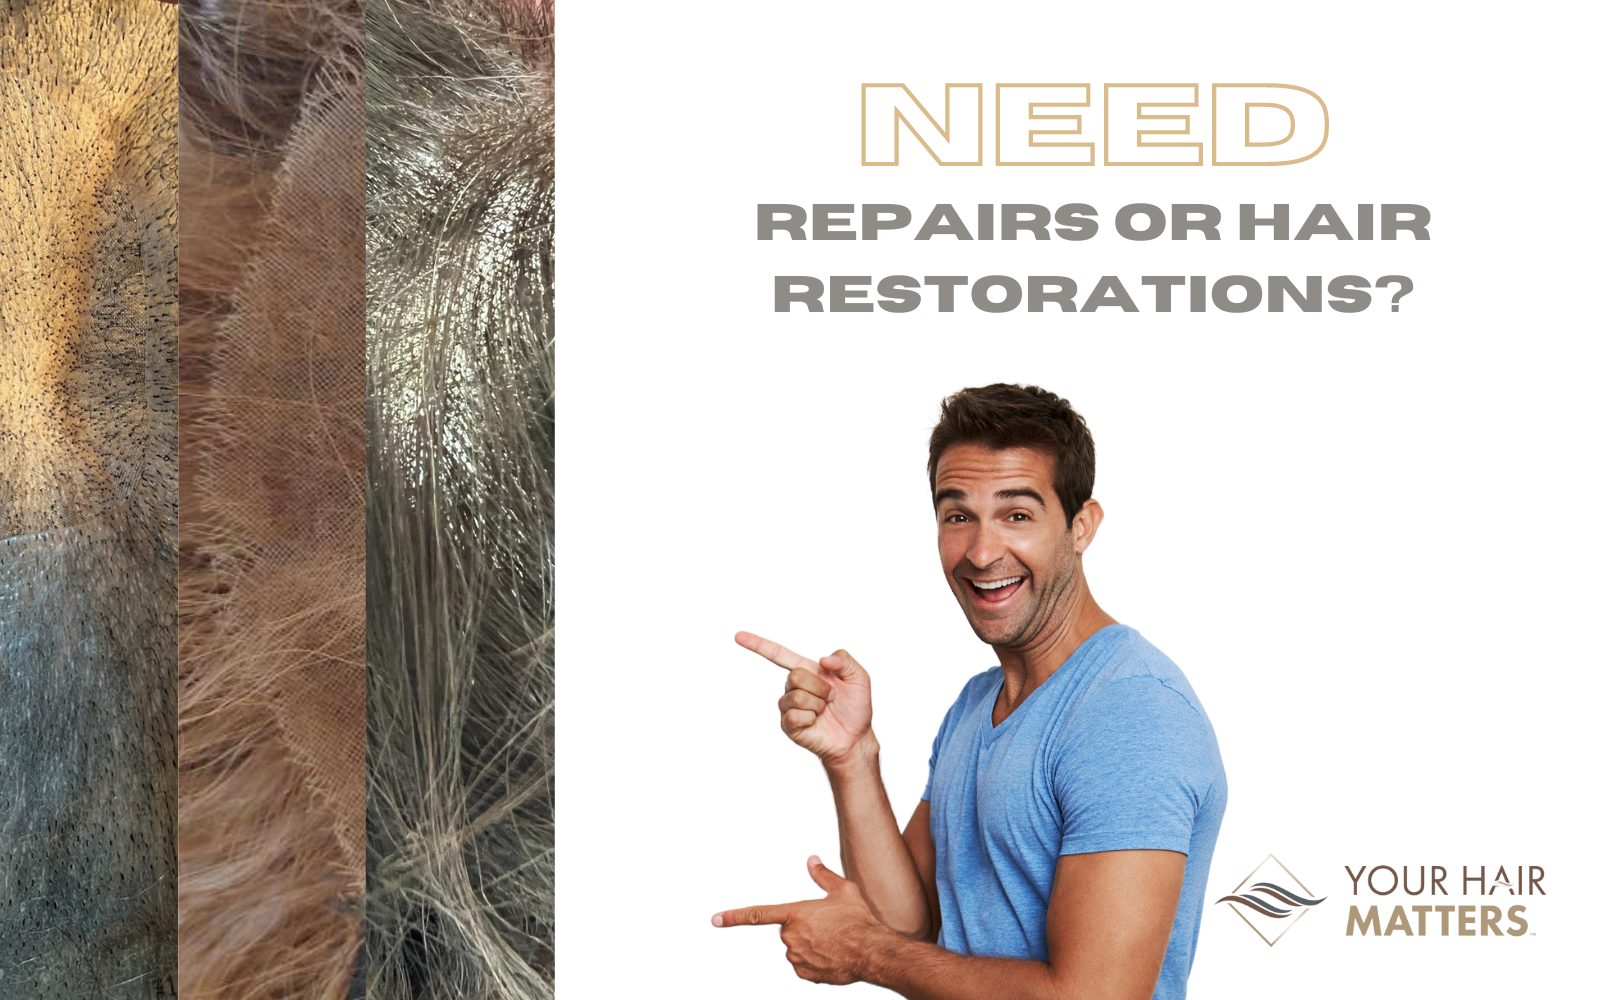 Hair System Repairs | Hair Density Adds | Hair Systems Restored | Wholesale Hair Systems | Add Hair back to your Hair Systems | Starting At $99 For Hair System Repairs